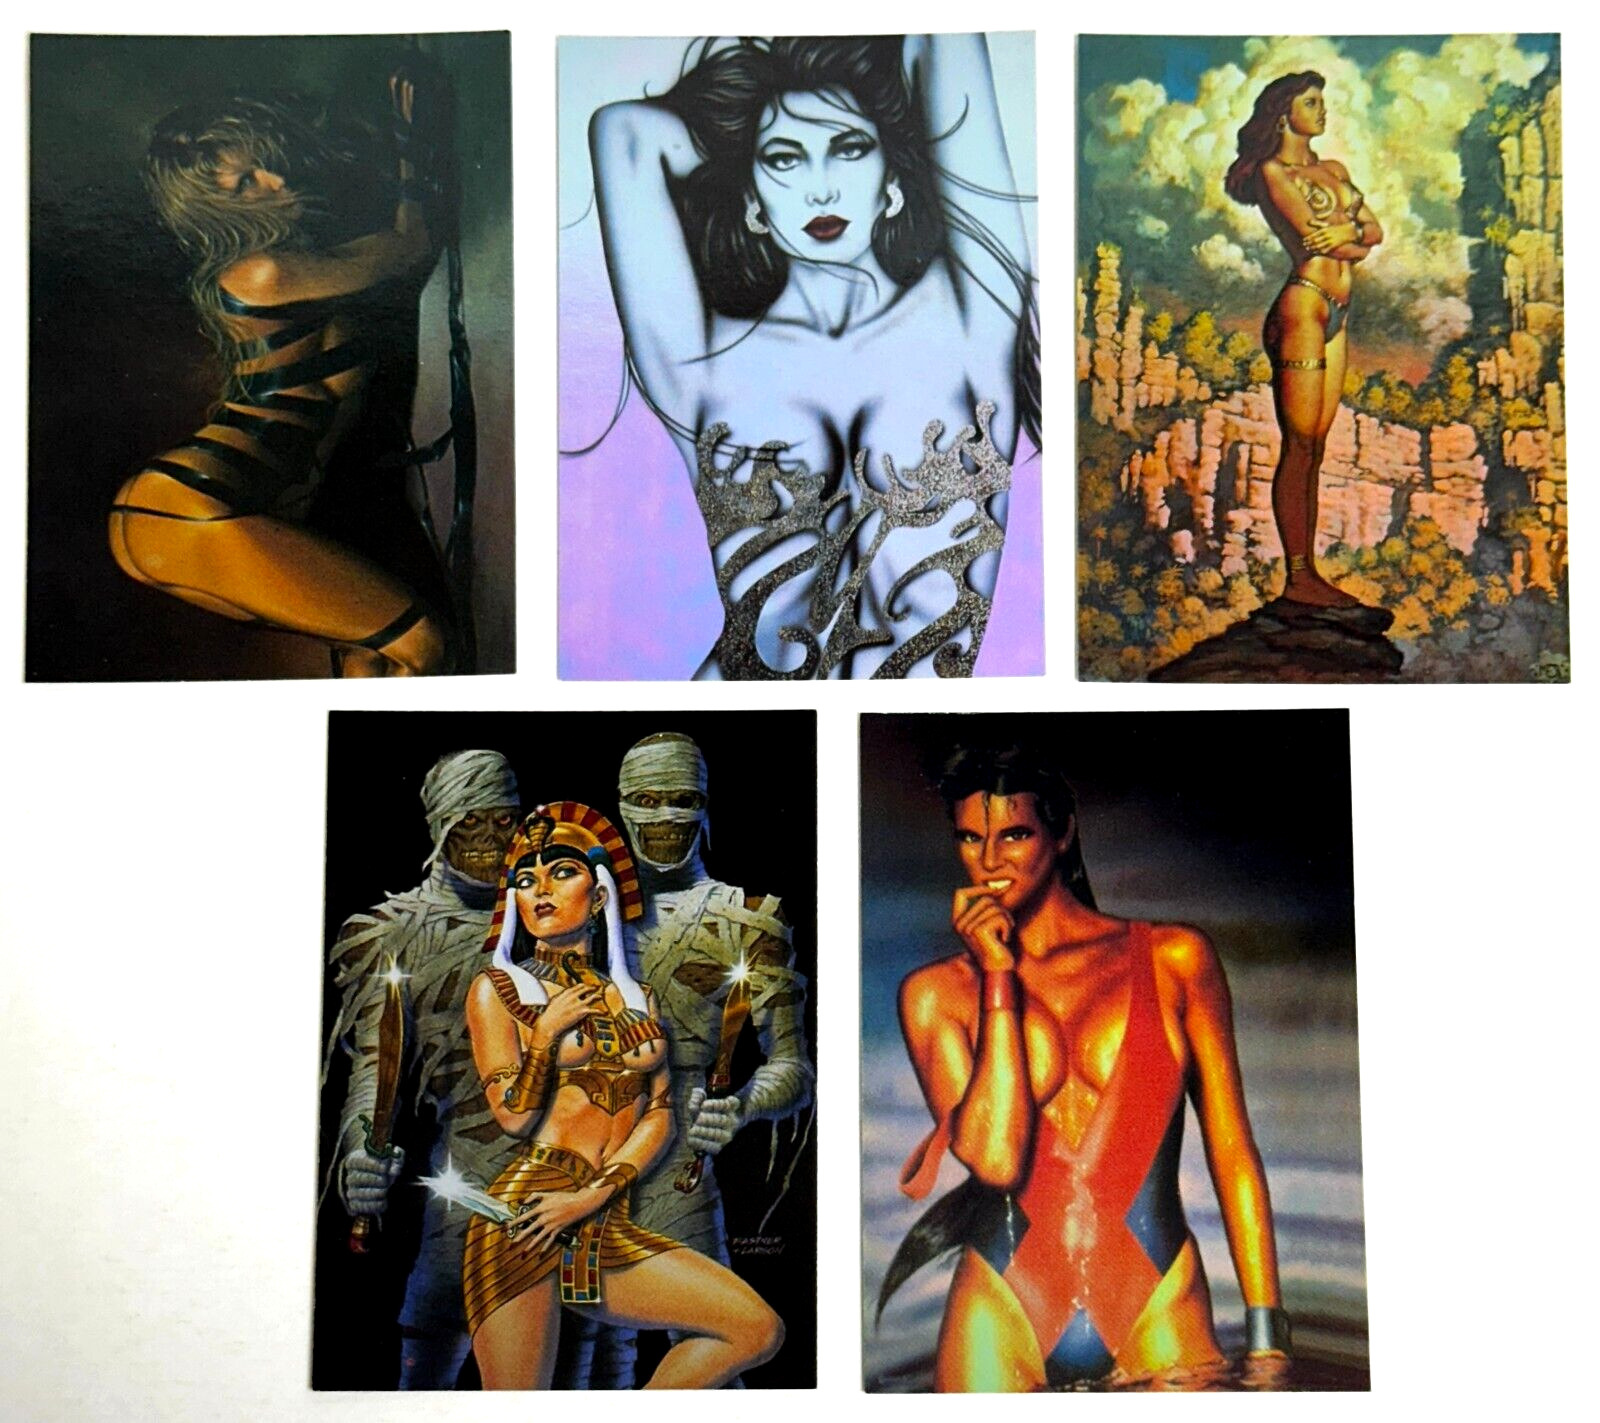 1997 New American Pin-Up Complete Promo Trading Card Set 1-5 from Comic Images